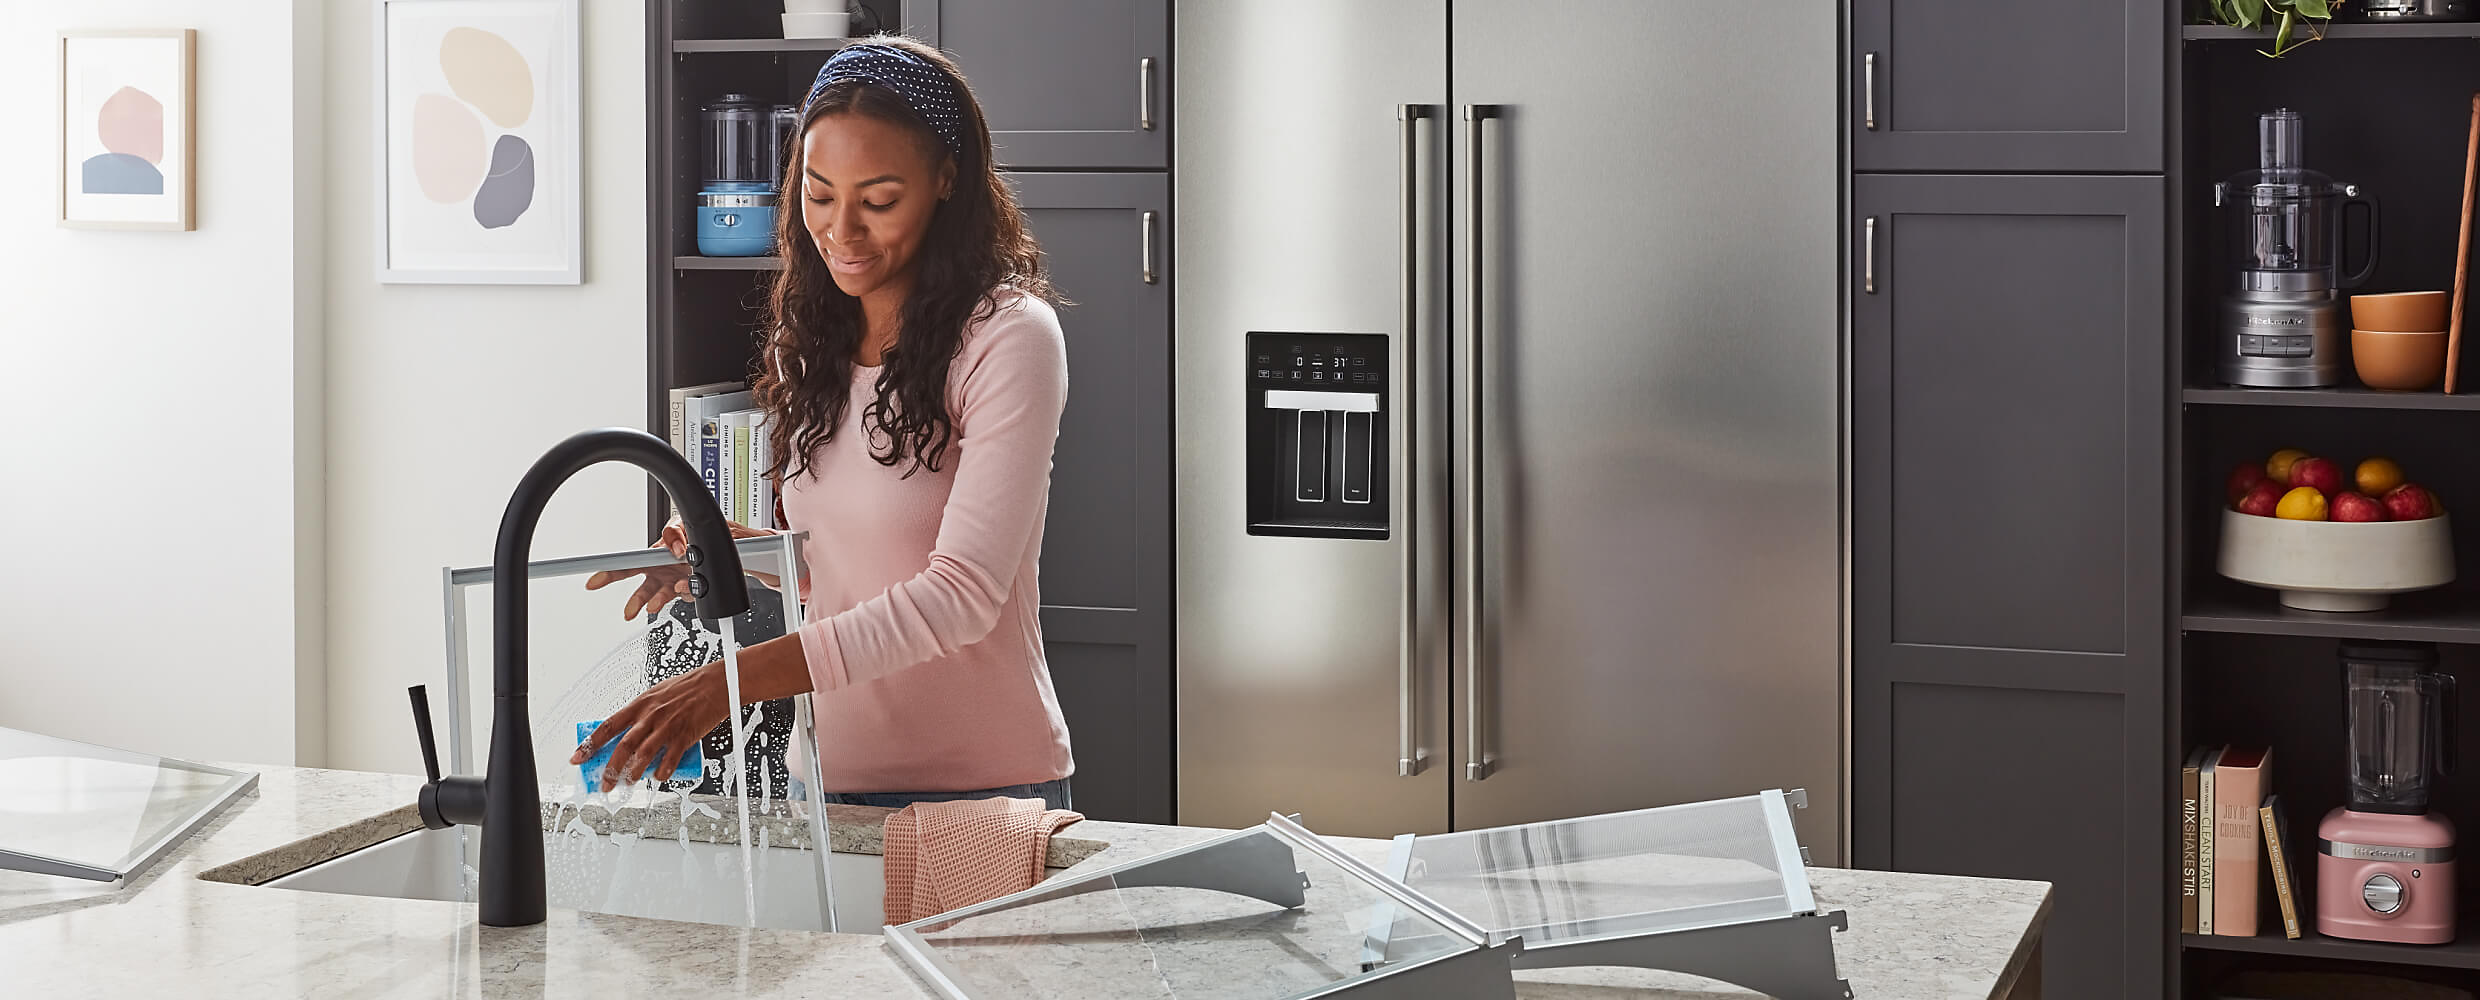 48" KitchenAid® Built-In Side-by-Side Refrigerator featured in the kitchen with a maker rinsing the bins and shelves